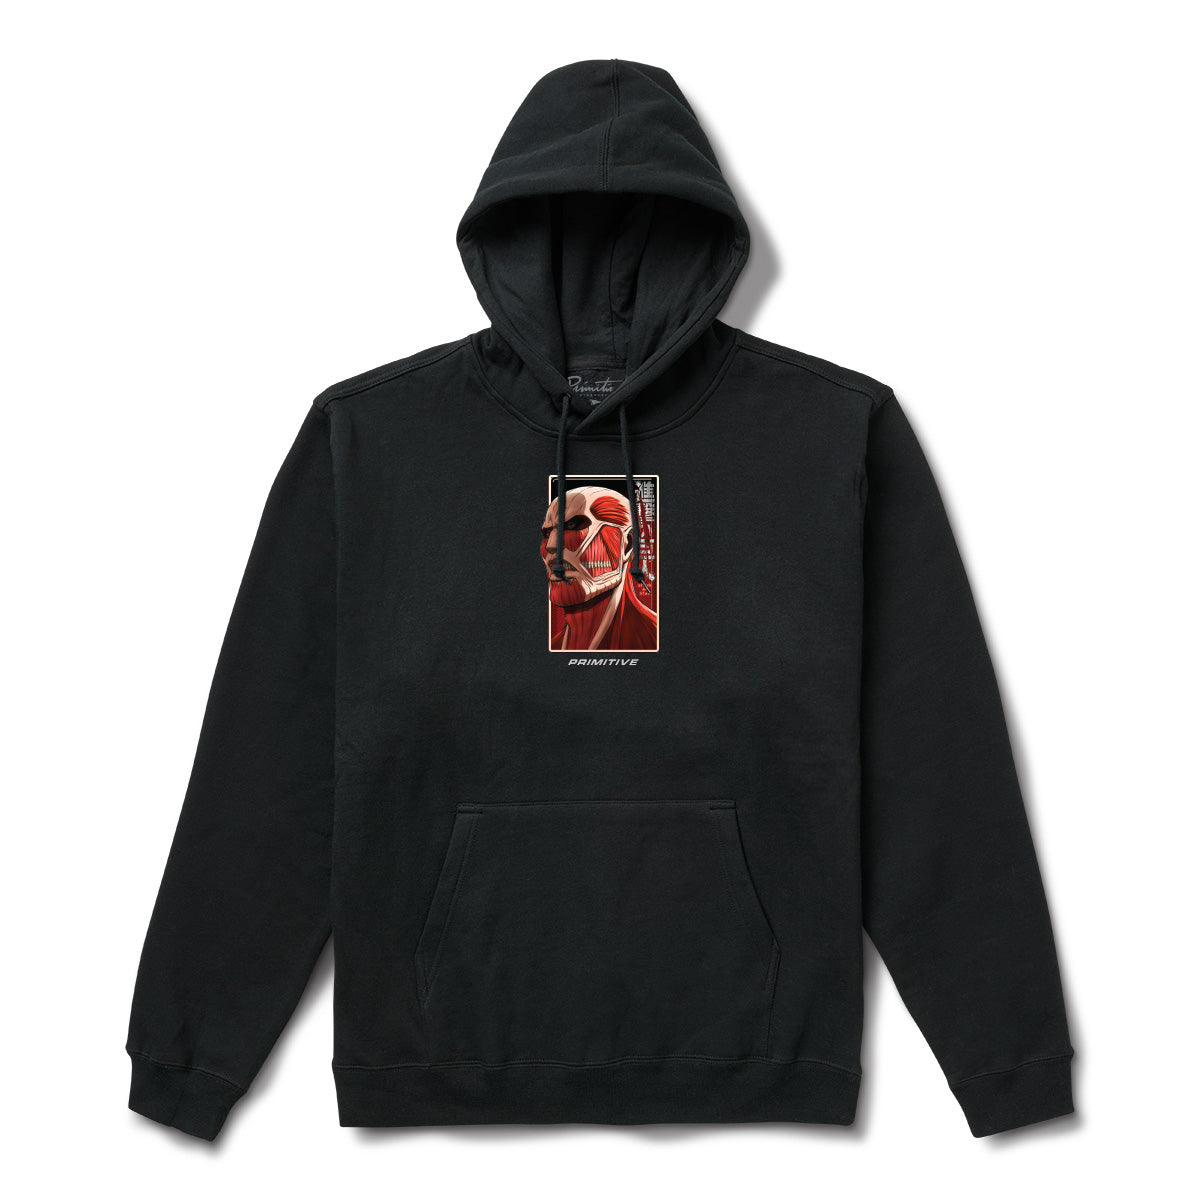 Primitive x Titans Colossal Dirty P Hoodie - Black image 1